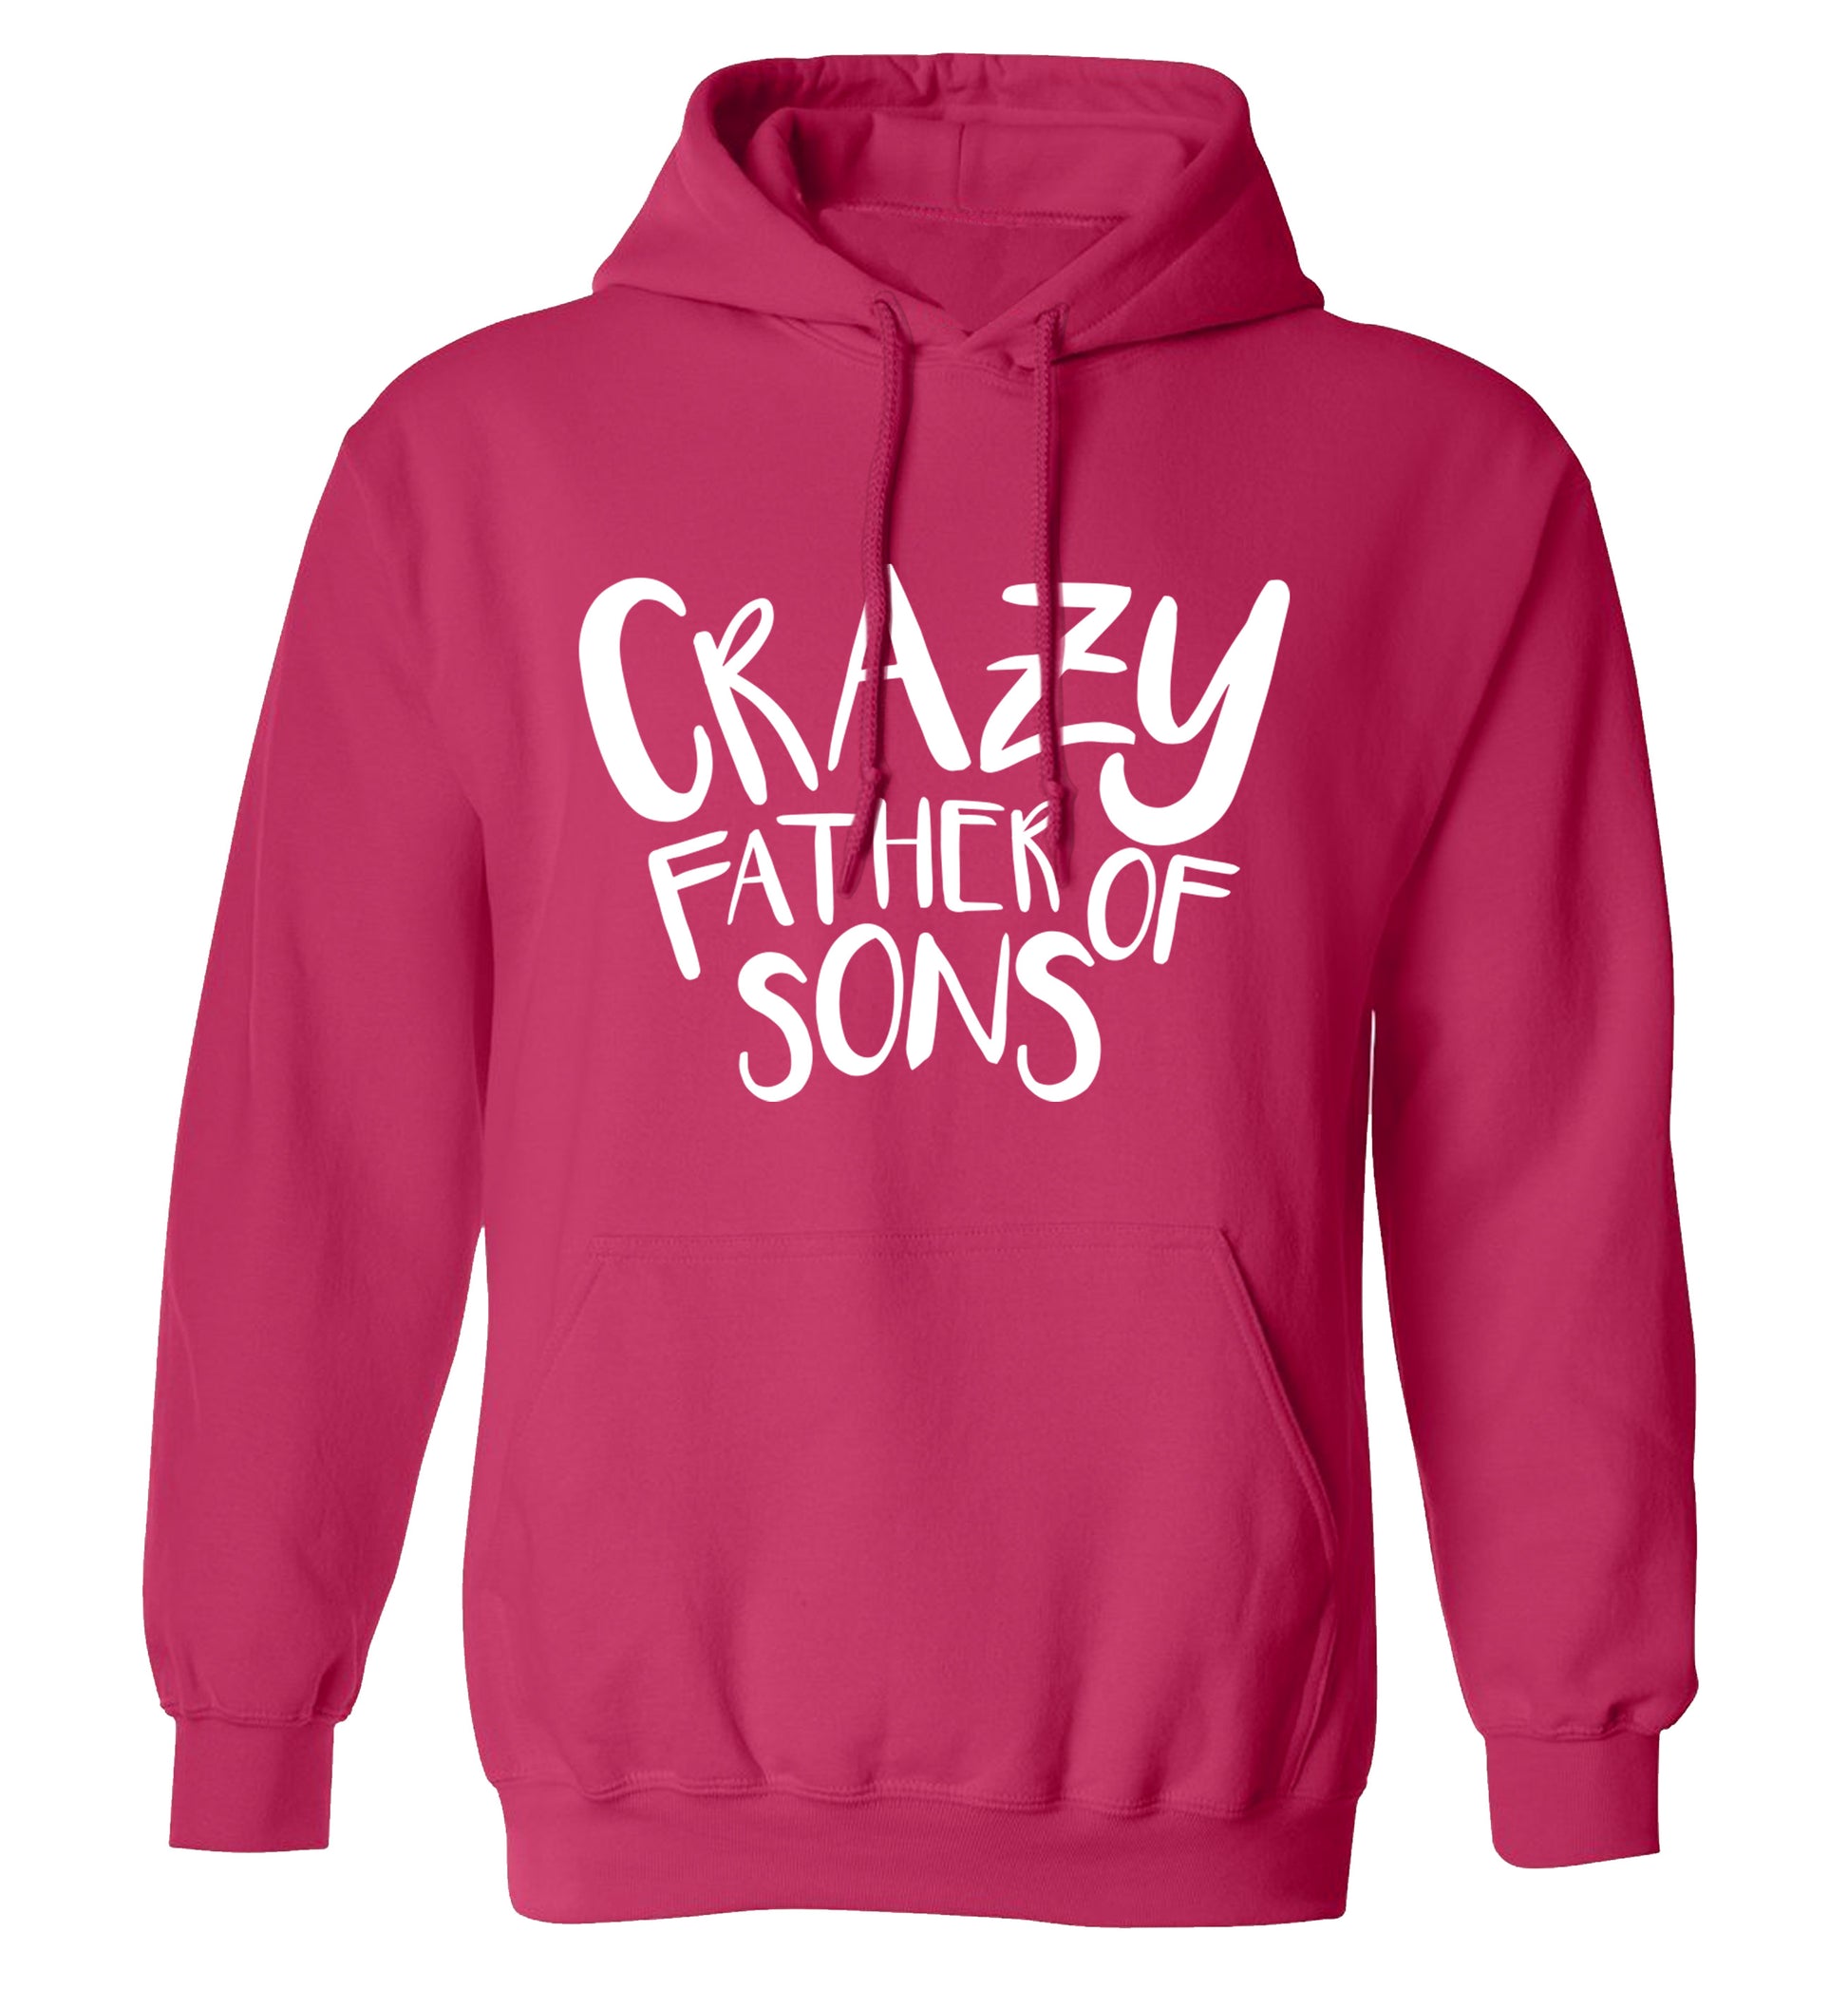 Crazy father of sons adults unisex pink hoodie 2XL